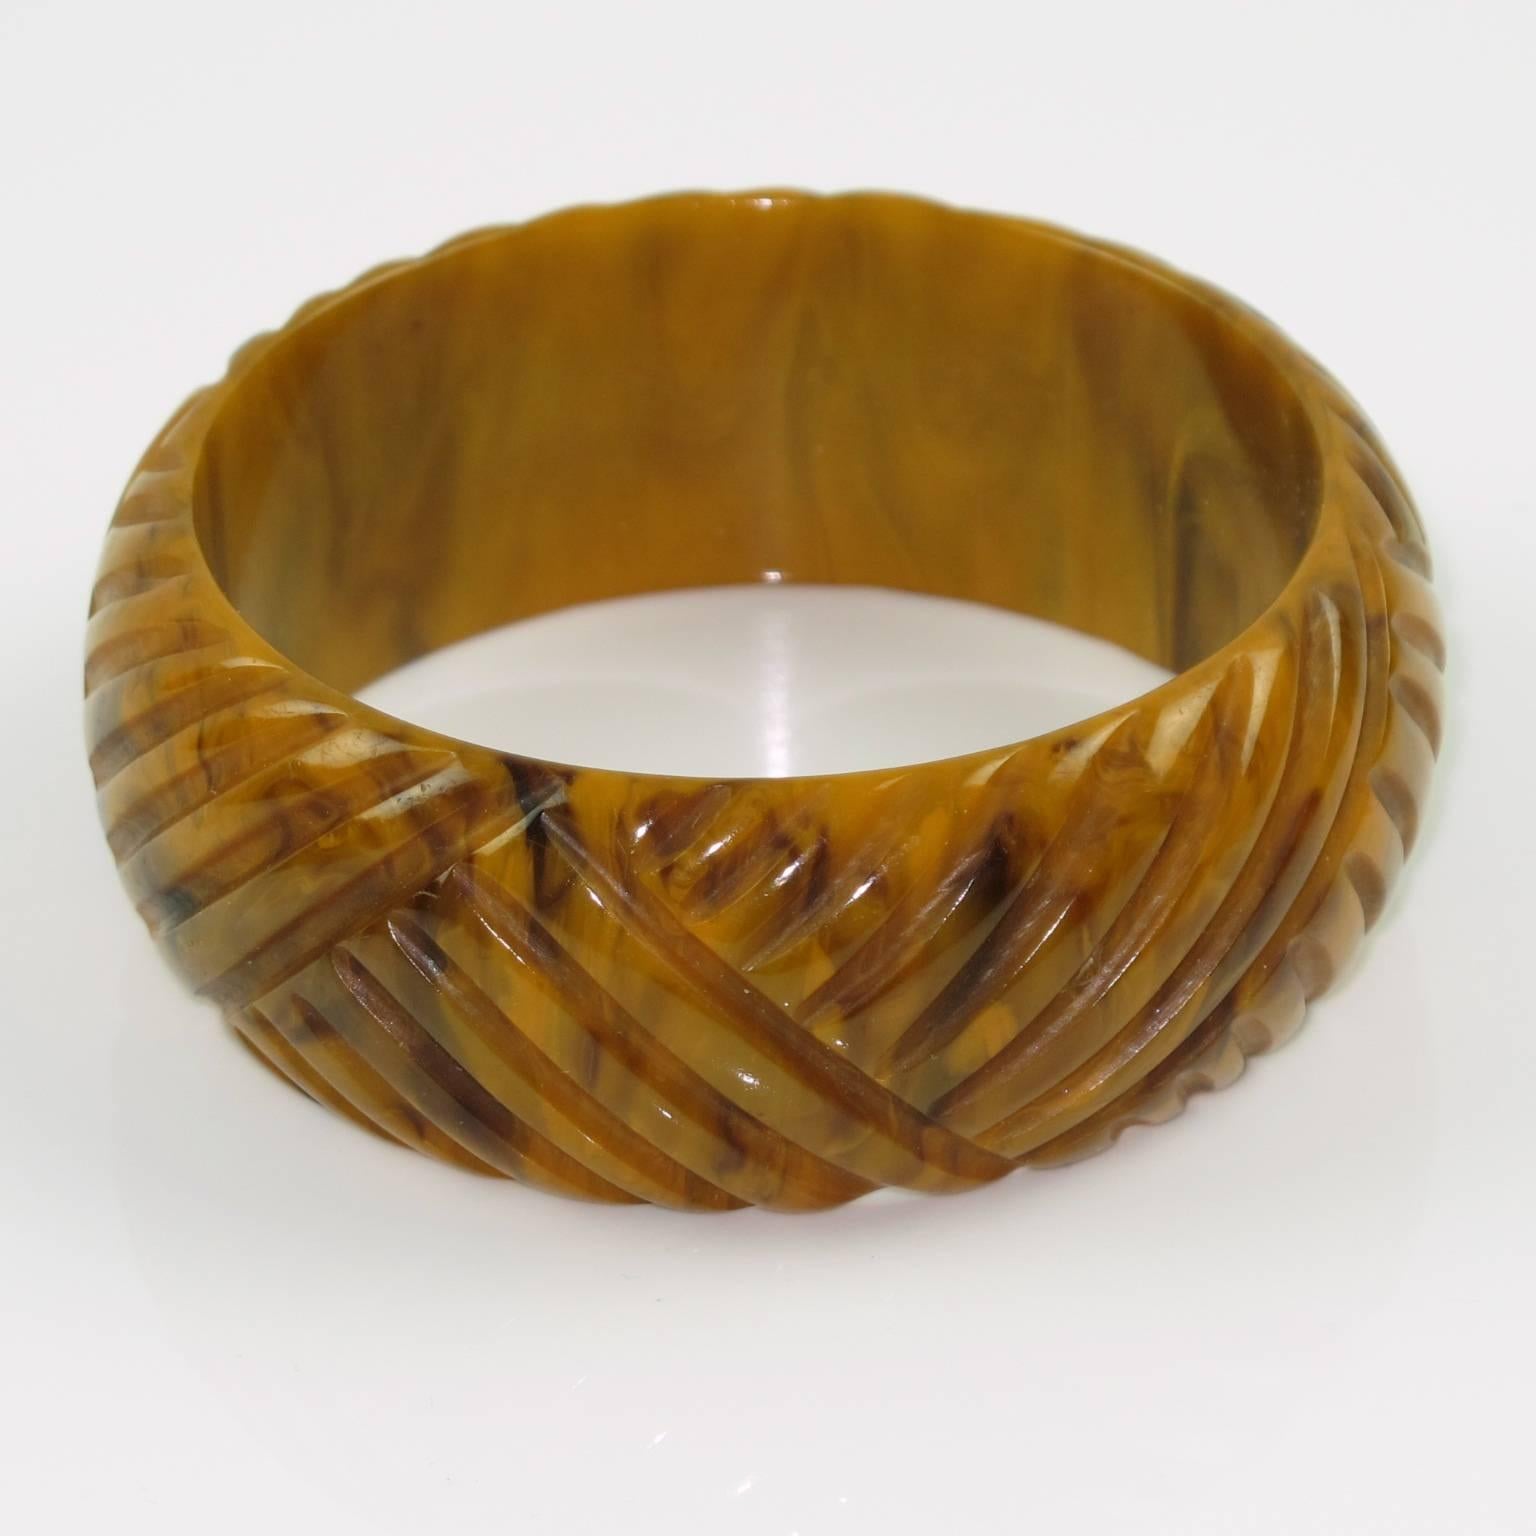 Vintage chocolate sundae marble Bakelite carved bracelet bangle. Domed shape with deep geometric carving all around. Intense chocolate marble tone with gold and brown cloudy swirling. Excellent vintage condition. France, circa